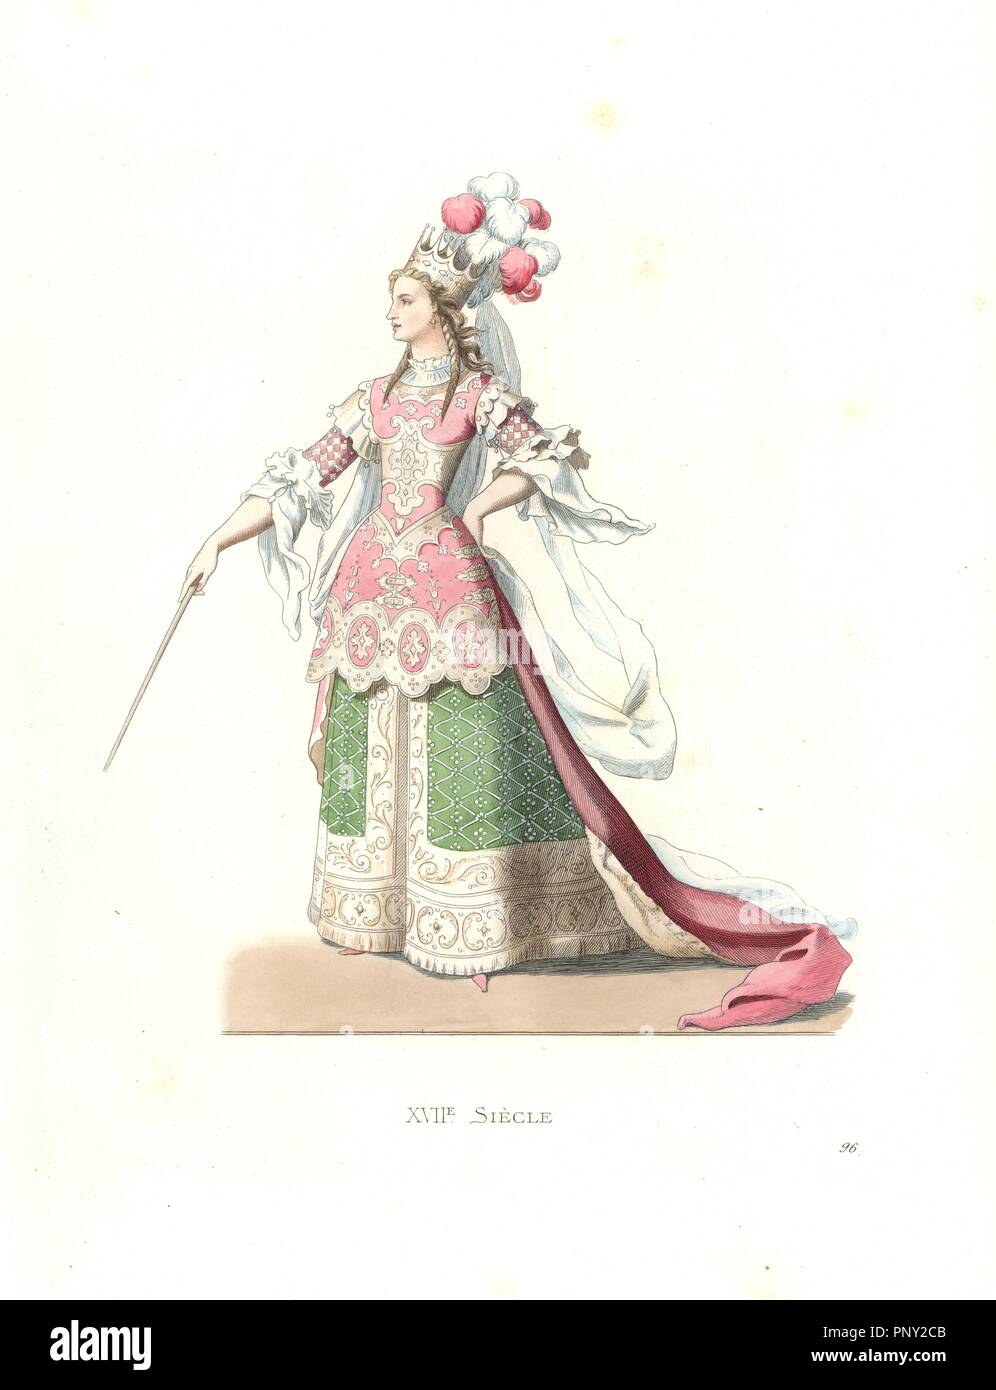 French woman in ballet costume, 17th century. Handcolored illustration by E. Lechevallier-Chevignard, lithographed by A. Didier, L. Flameng, F. Laguillermie, from Georges Duplessis's 'Costumes historiques des XVIe, XVIIe et XVIIIe siecles' (Historical costumes of the 16th, 17th and 18th centuries), Paris 1867. The book was a continuation of the series on the costumes of the 12th to 15th centuries published by Camille Bonnard and Paul Mercuri from 1830. Georges Duplessis (1834-1899) was curator of the Prints department at the Bibliotheque nationale. Edmond Lechevallier-Chevignard (1825-1902) wa Stock Photo